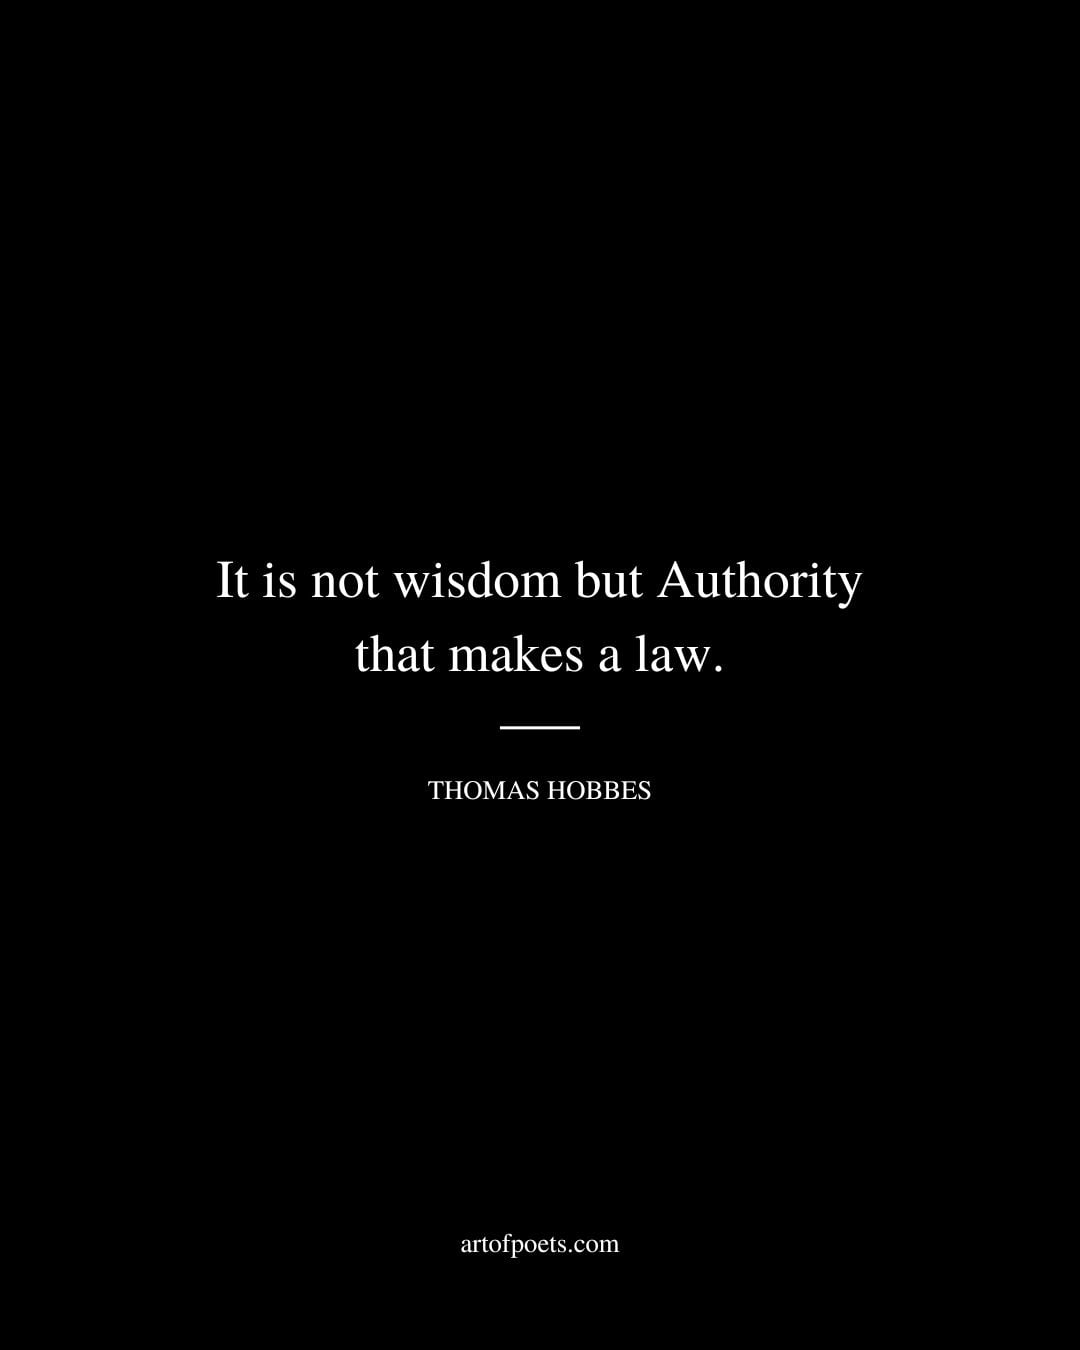 It is not wisdom but Authority that makes a law